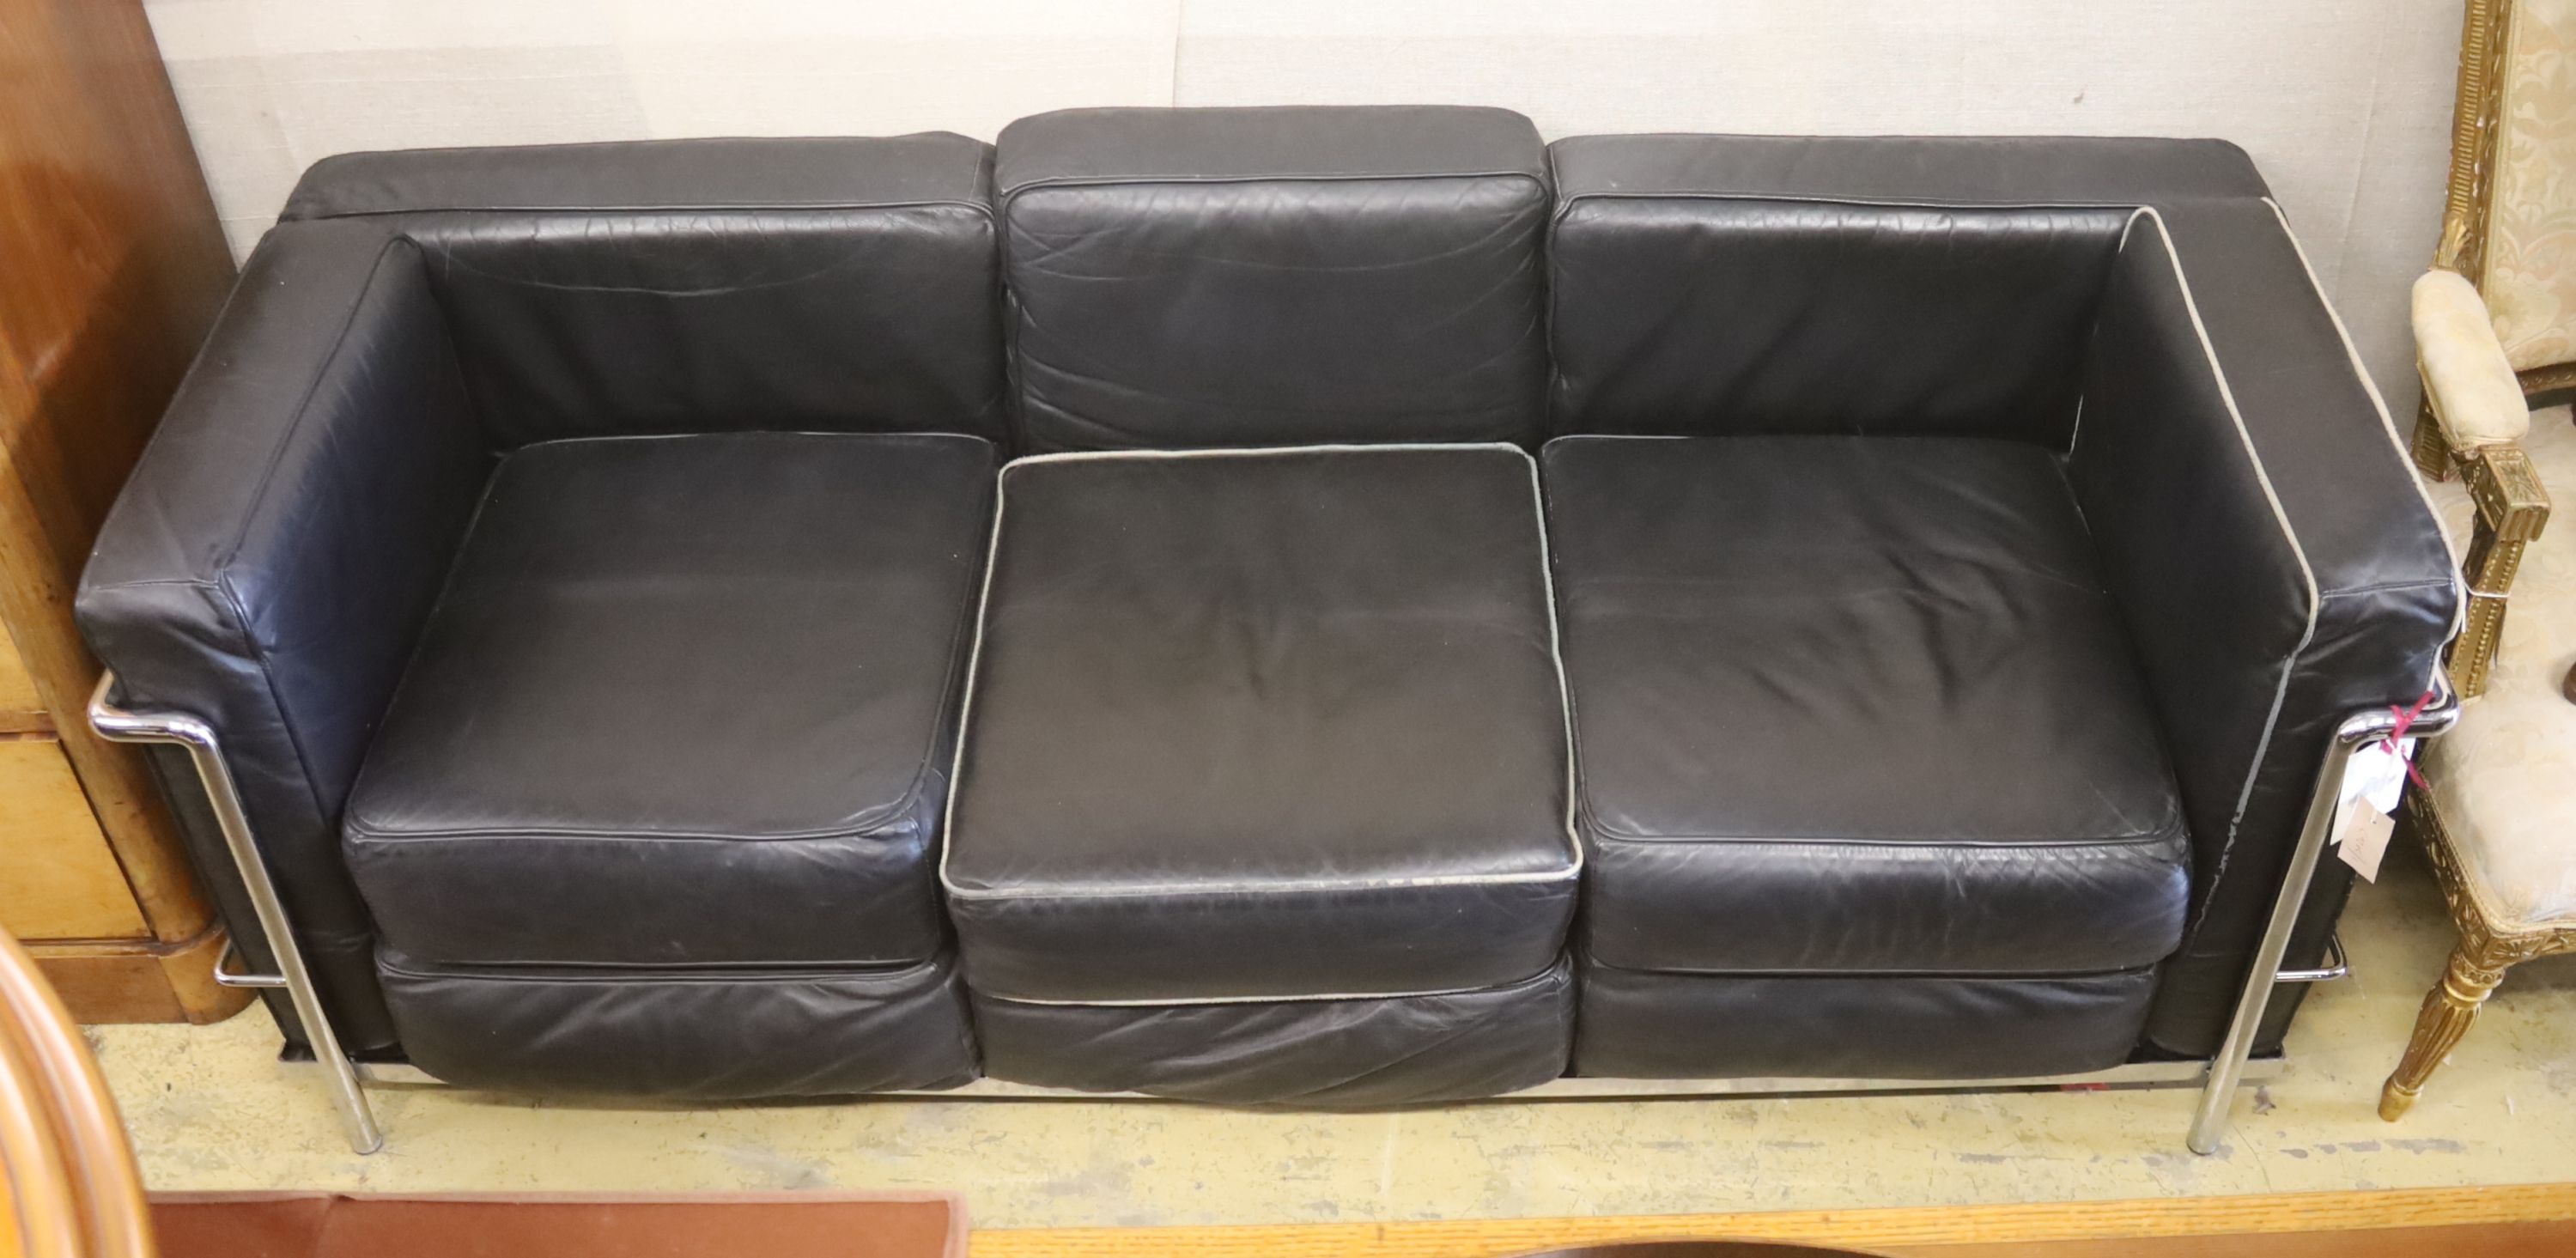 A Harrods Corbusier style chrome and black leather three seater settee, length 180cm, depth 69cm, height 67cm